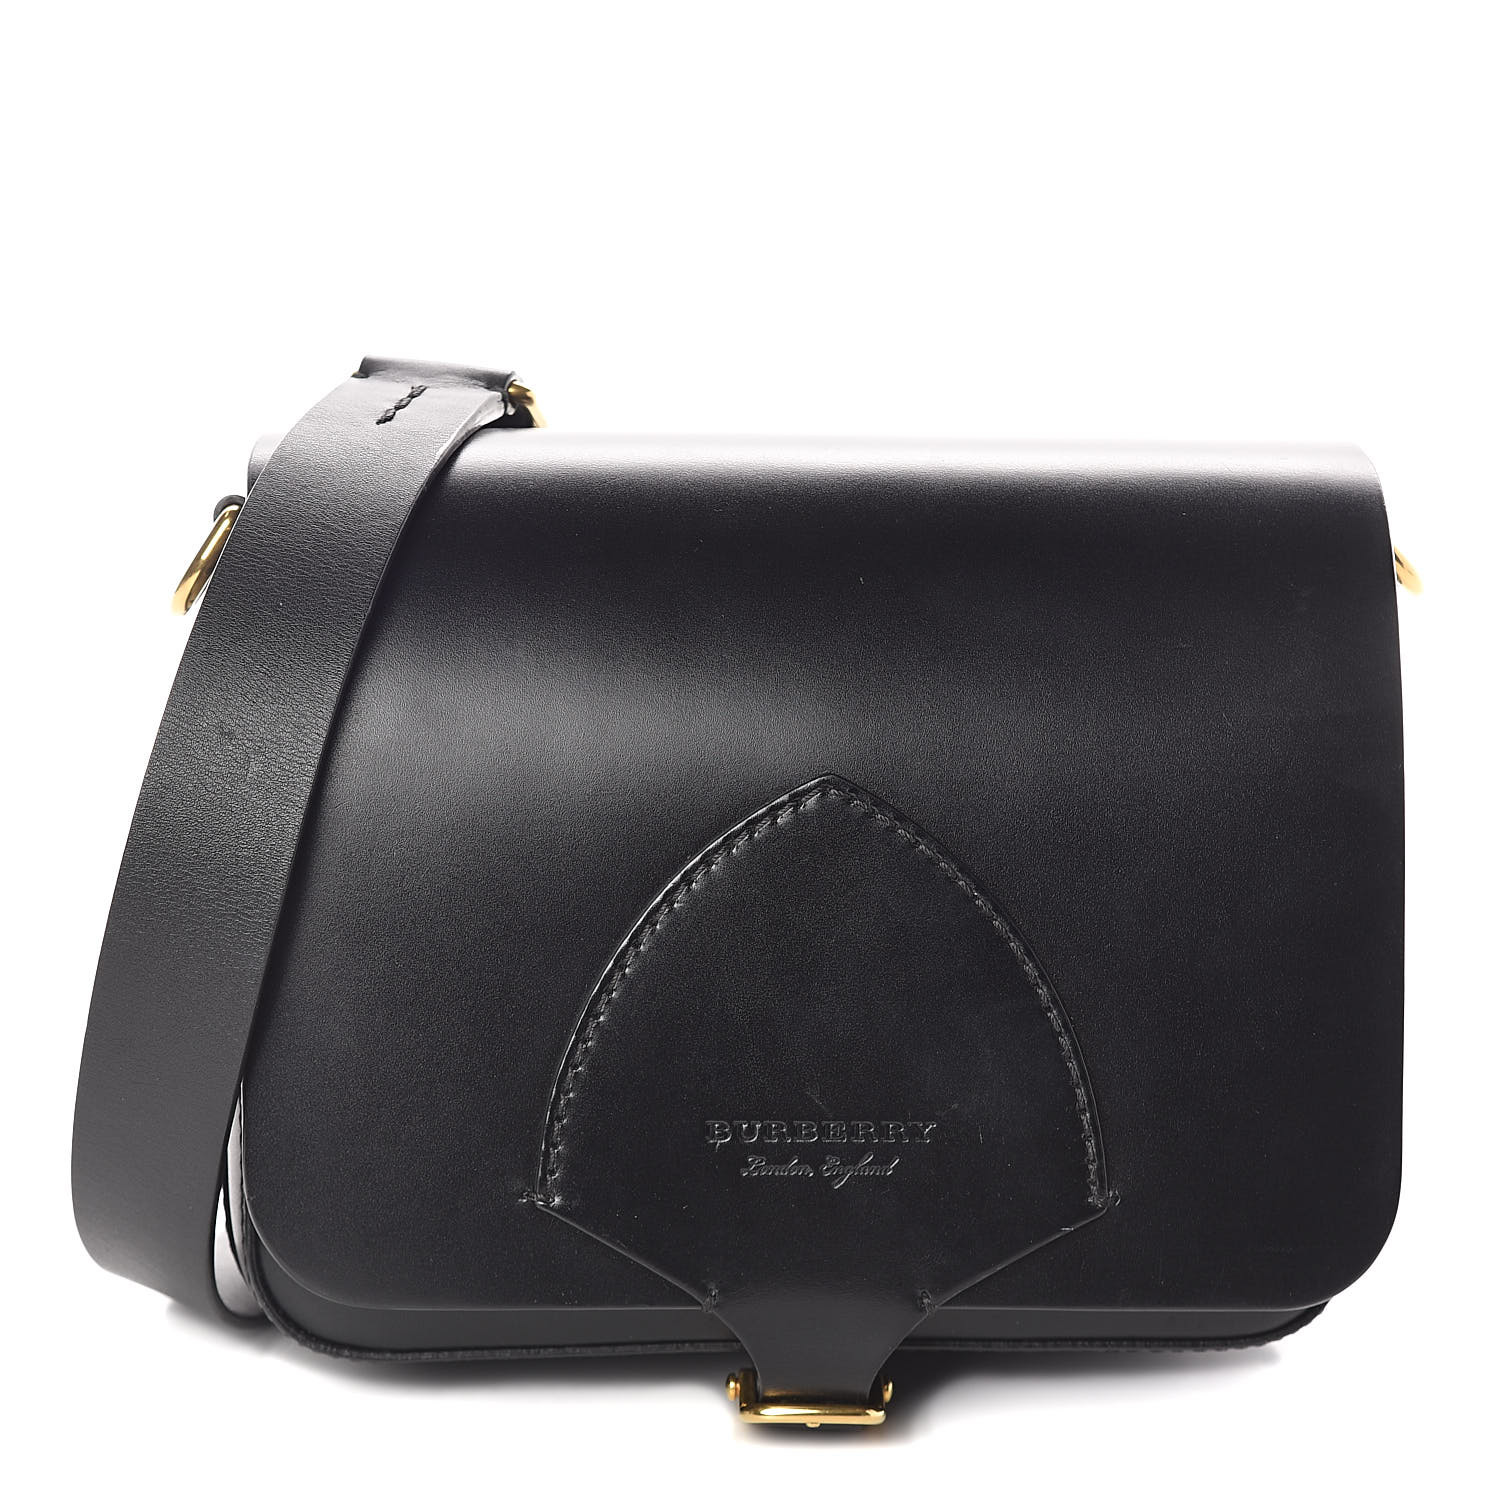 the square satchel in bridle leather